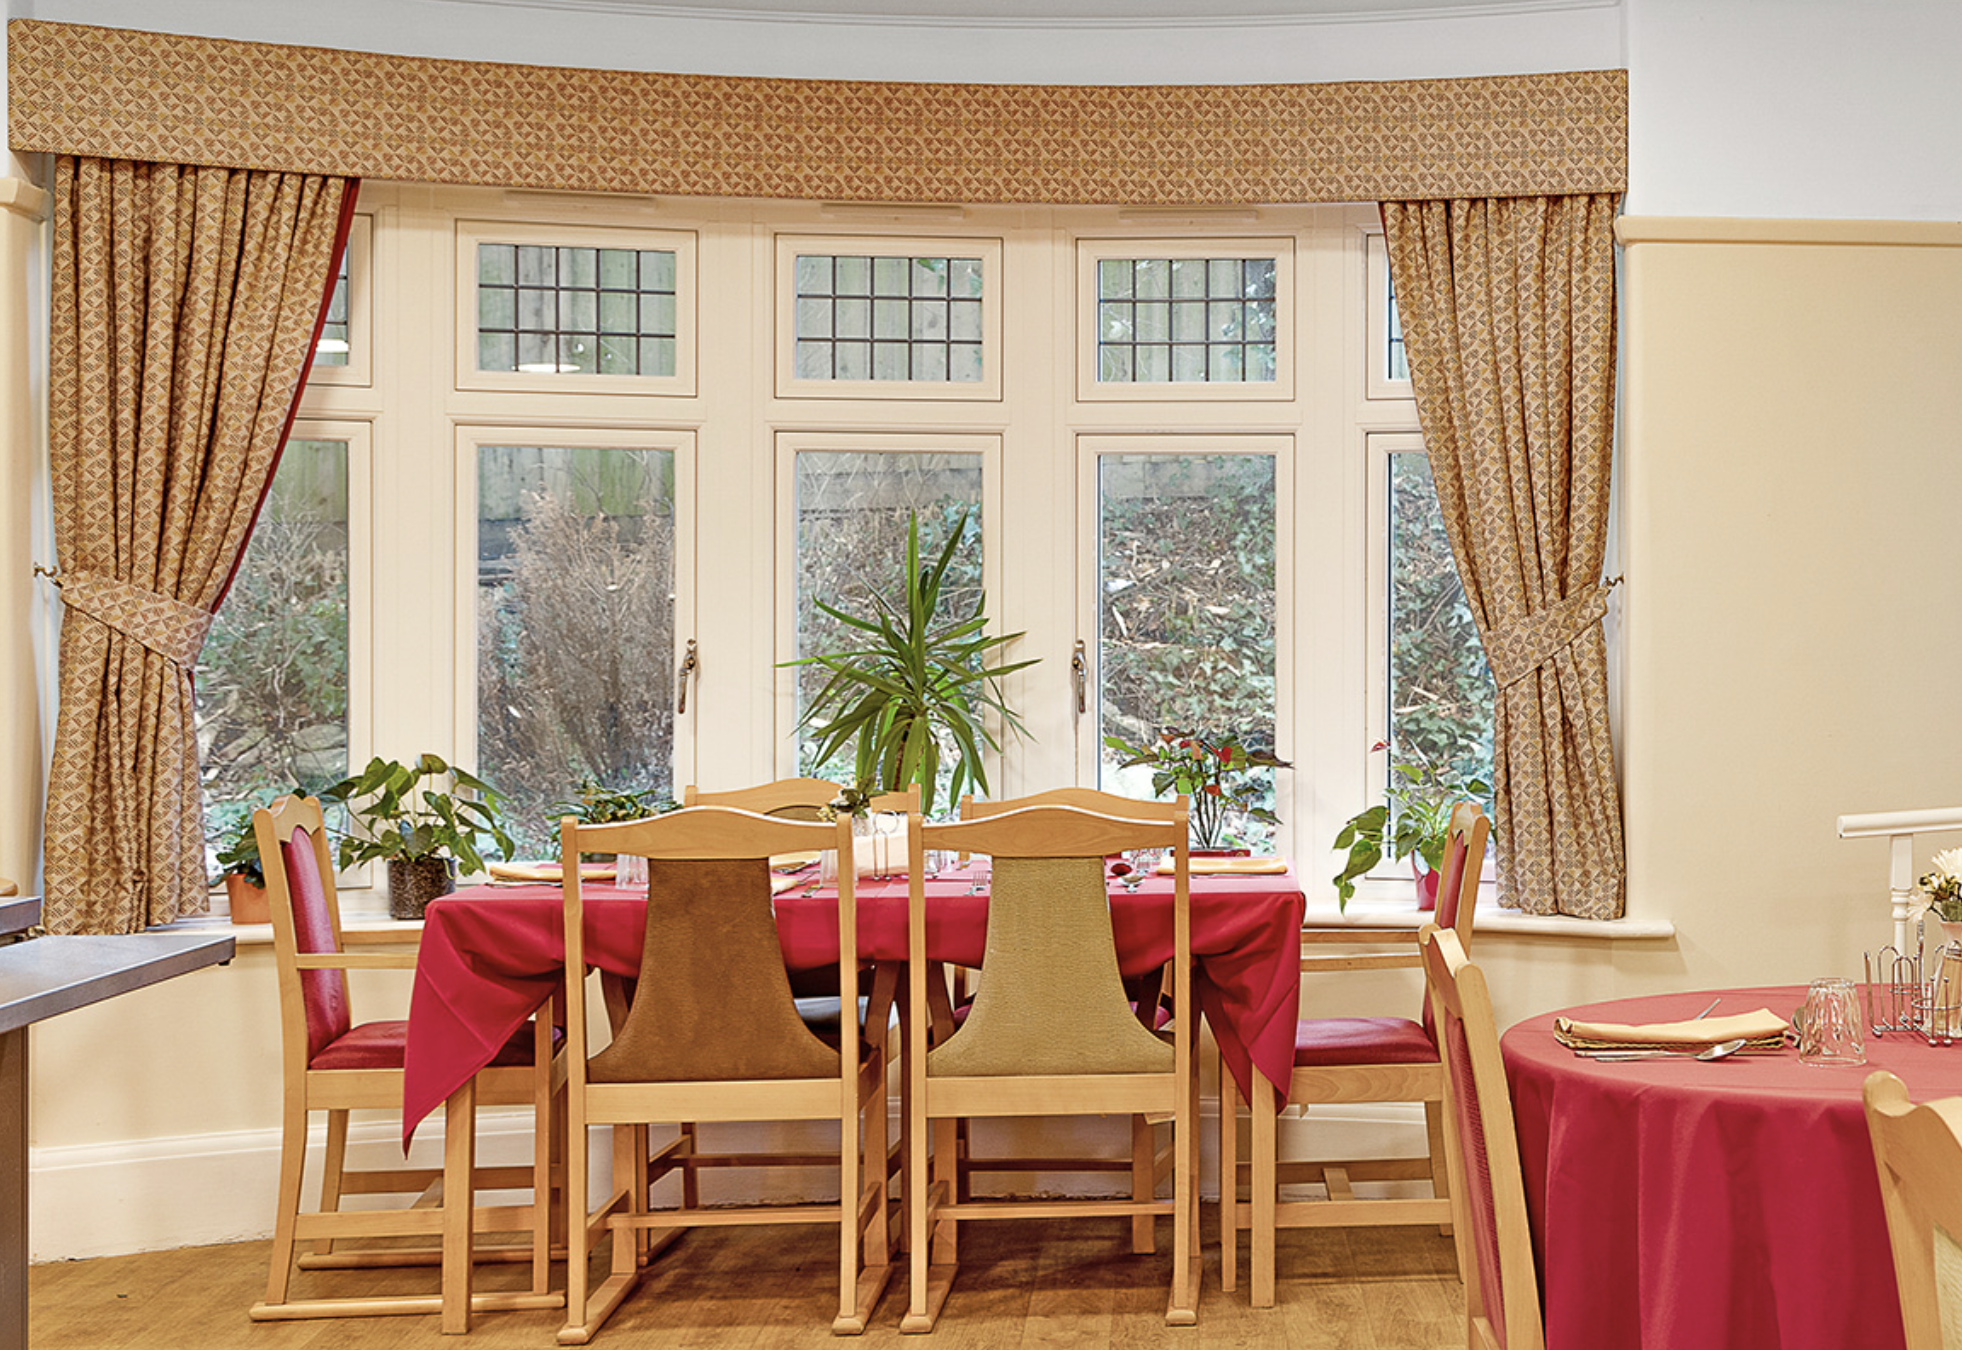 Dining area of The Laurels and Pine Lodge Care Home in Poole, Dorset